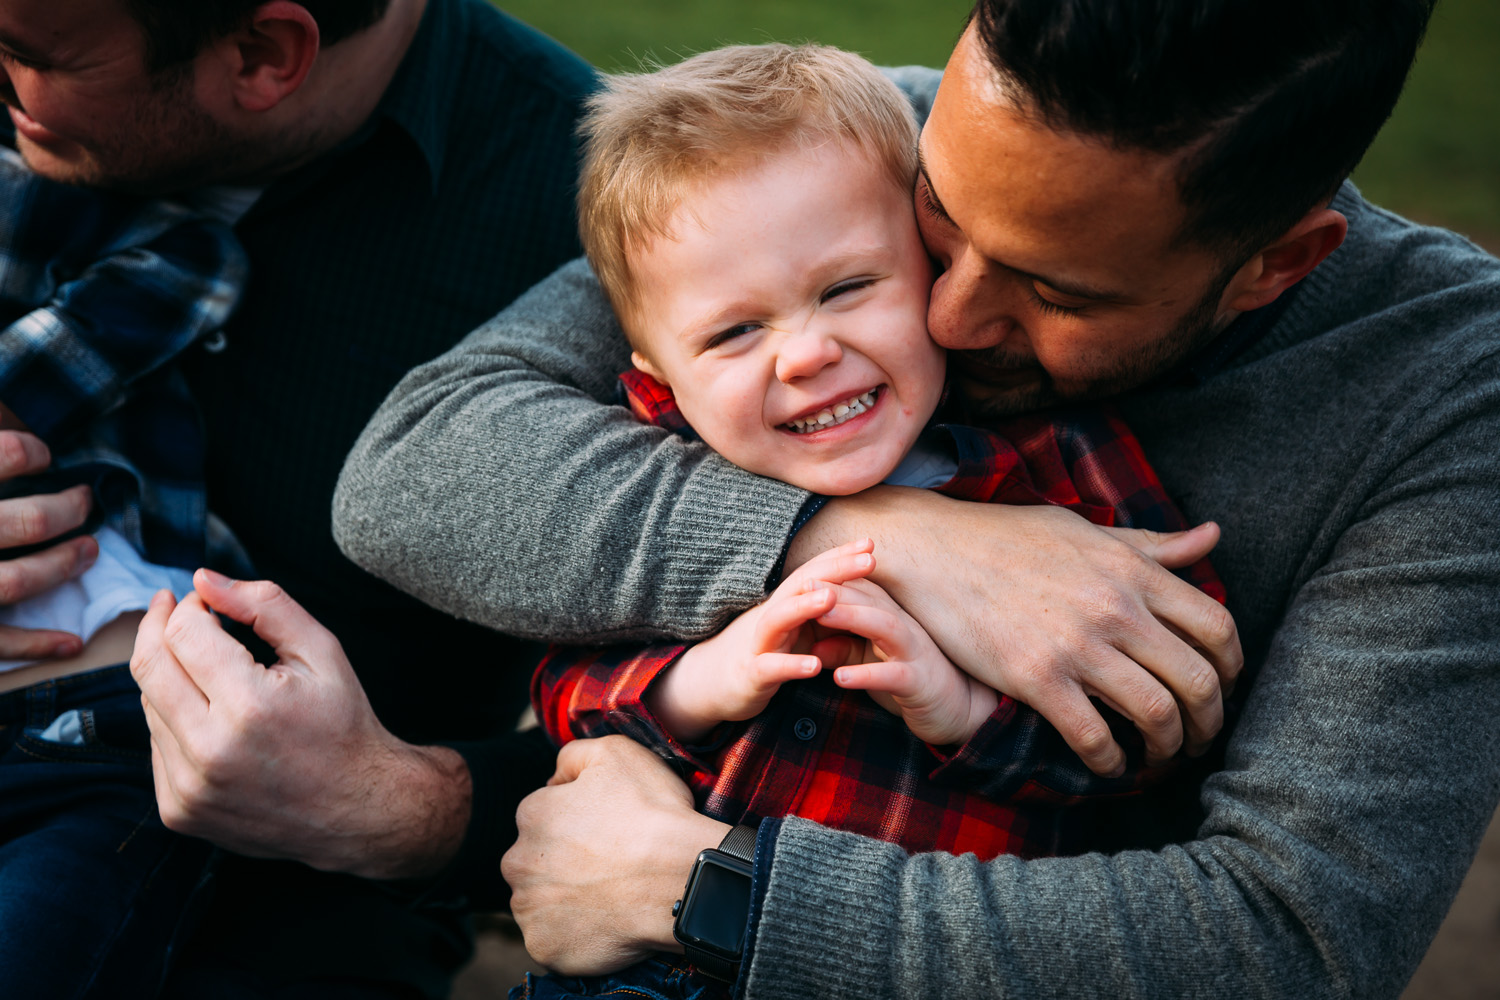 LGBTQ father deeply hugging adopted son